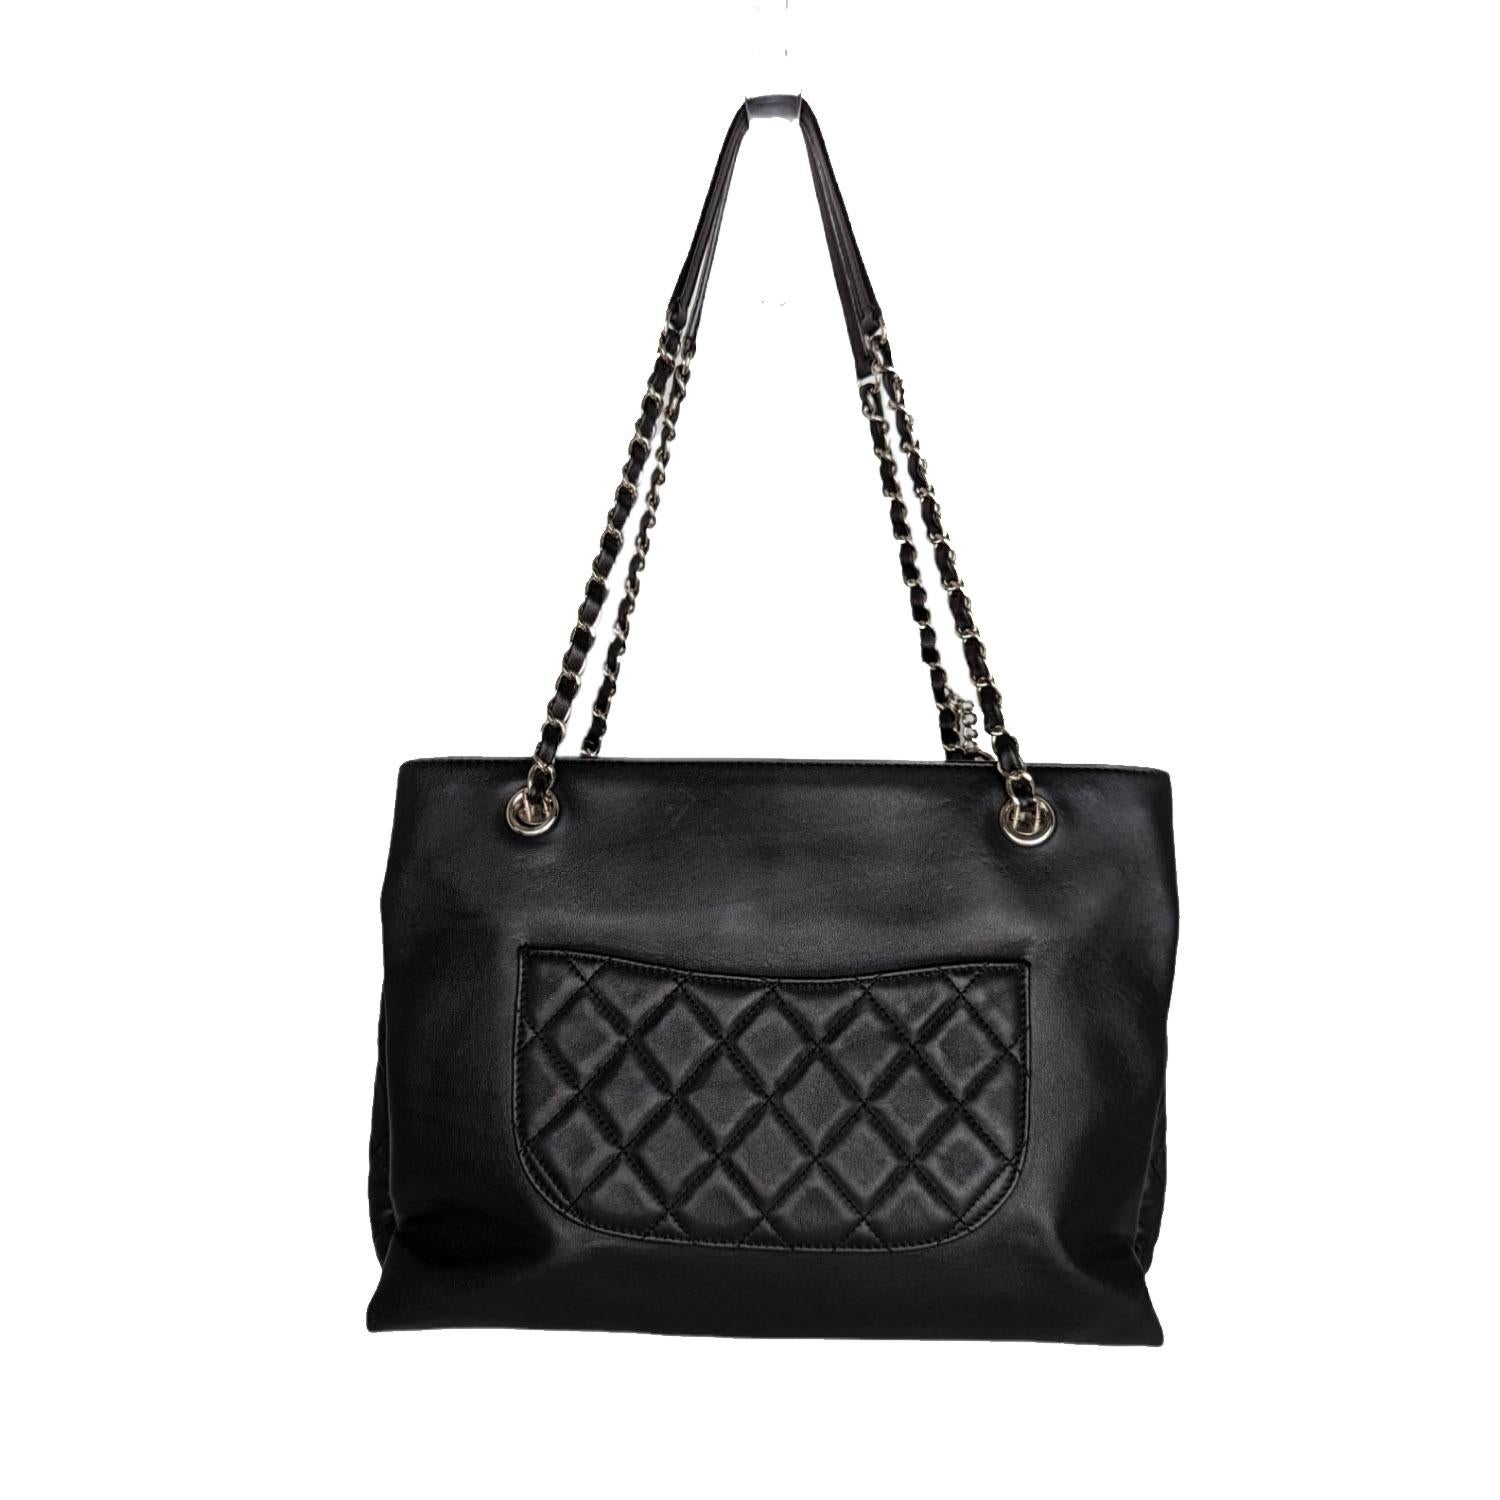 From the 2016 Collection by Karl Lagerfeld. This Chanel Accordion Shopping Tote is crafted of smooth Lambskin leather with quilted sides and trim. It features leather woven chain straps with leather shoulder pads, protective base studs, and